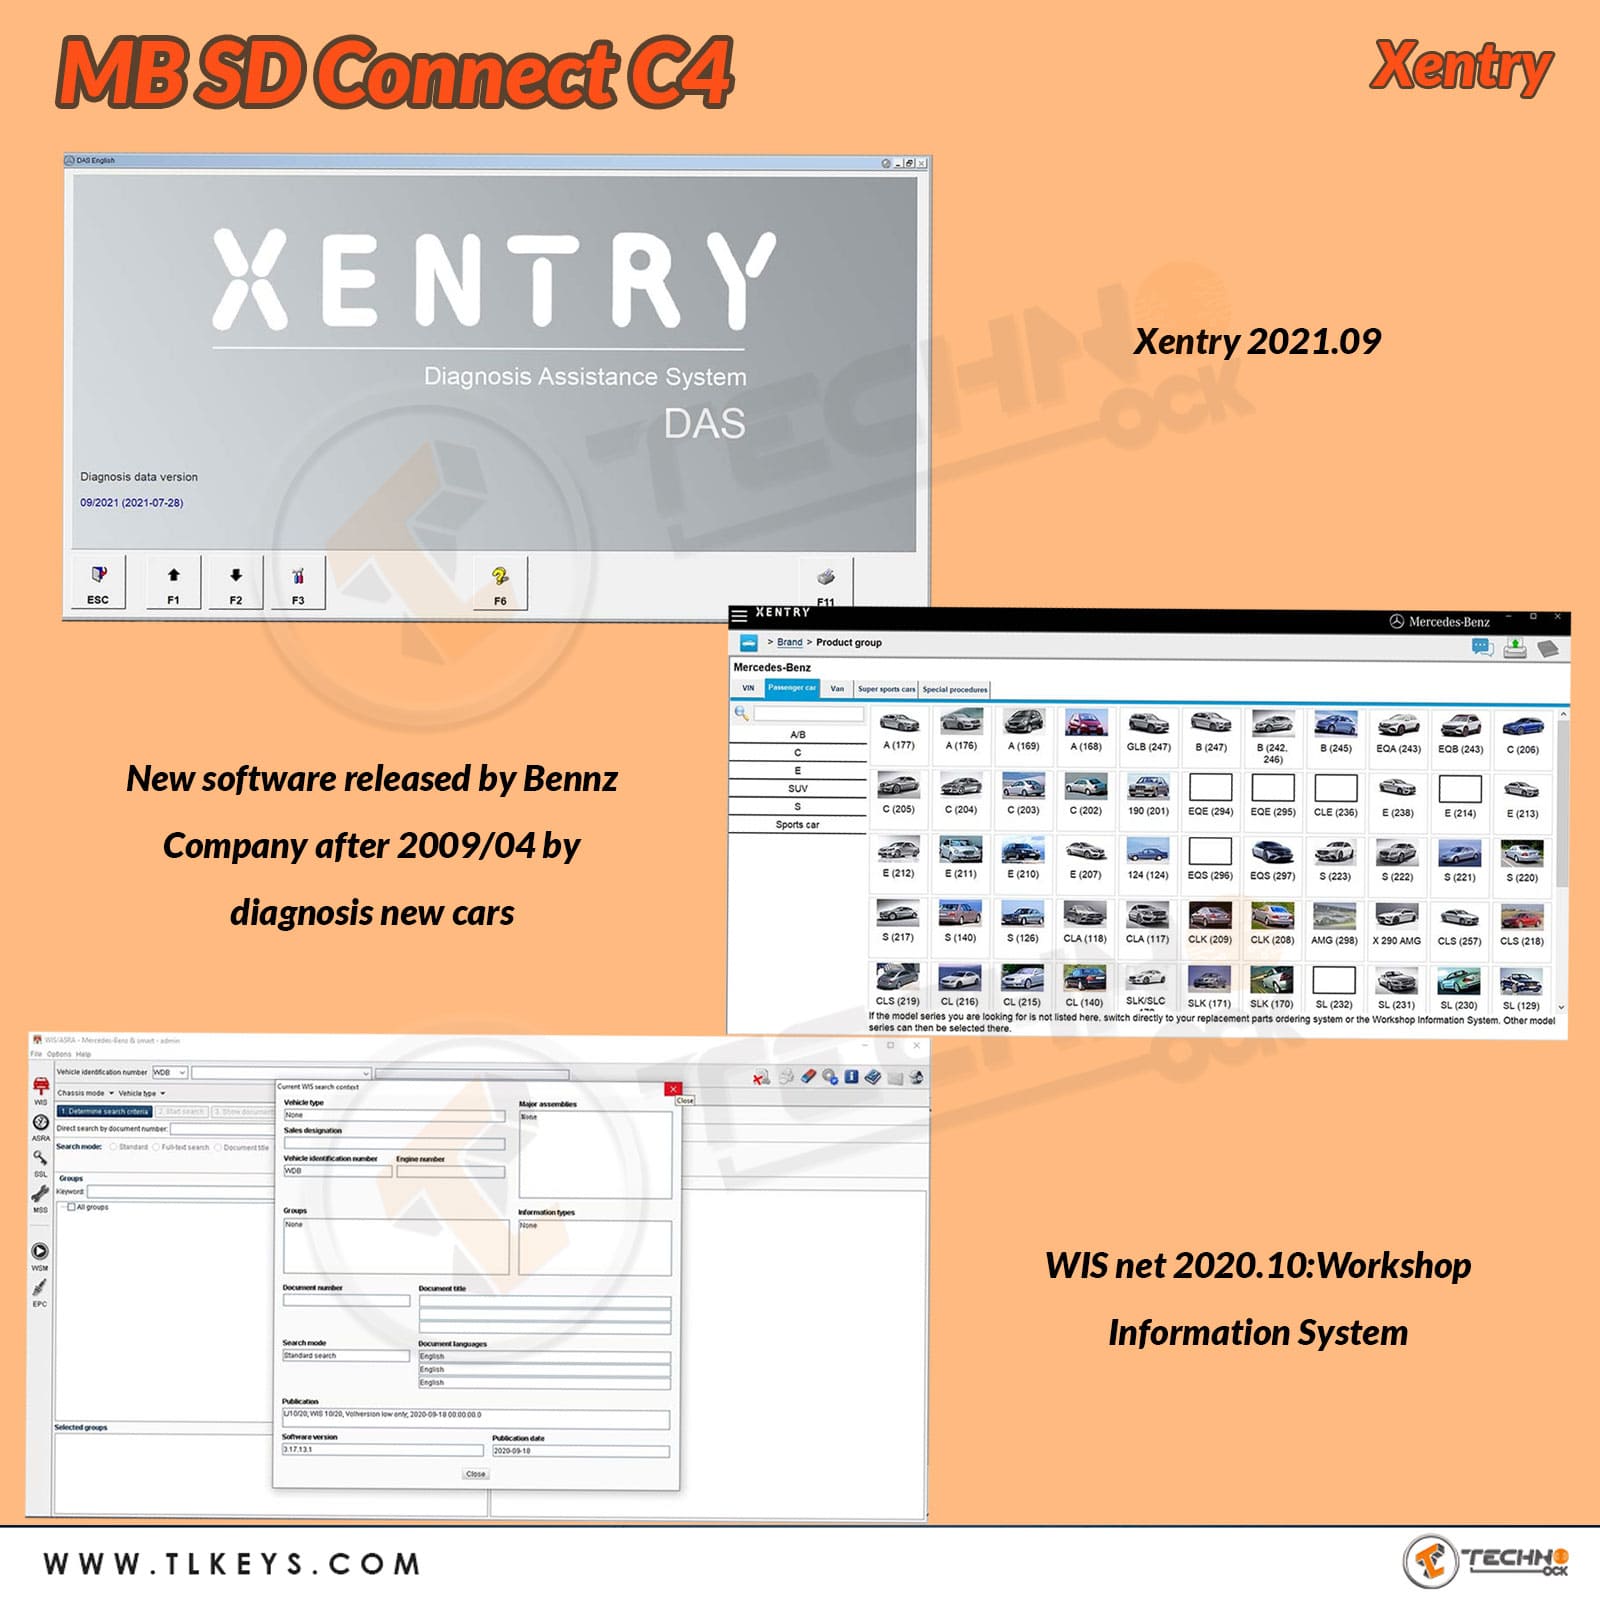 Super MB Star SD Connect C4 Multiplexer Mercedes Software Update To V2020.12 mercedes das xentry software